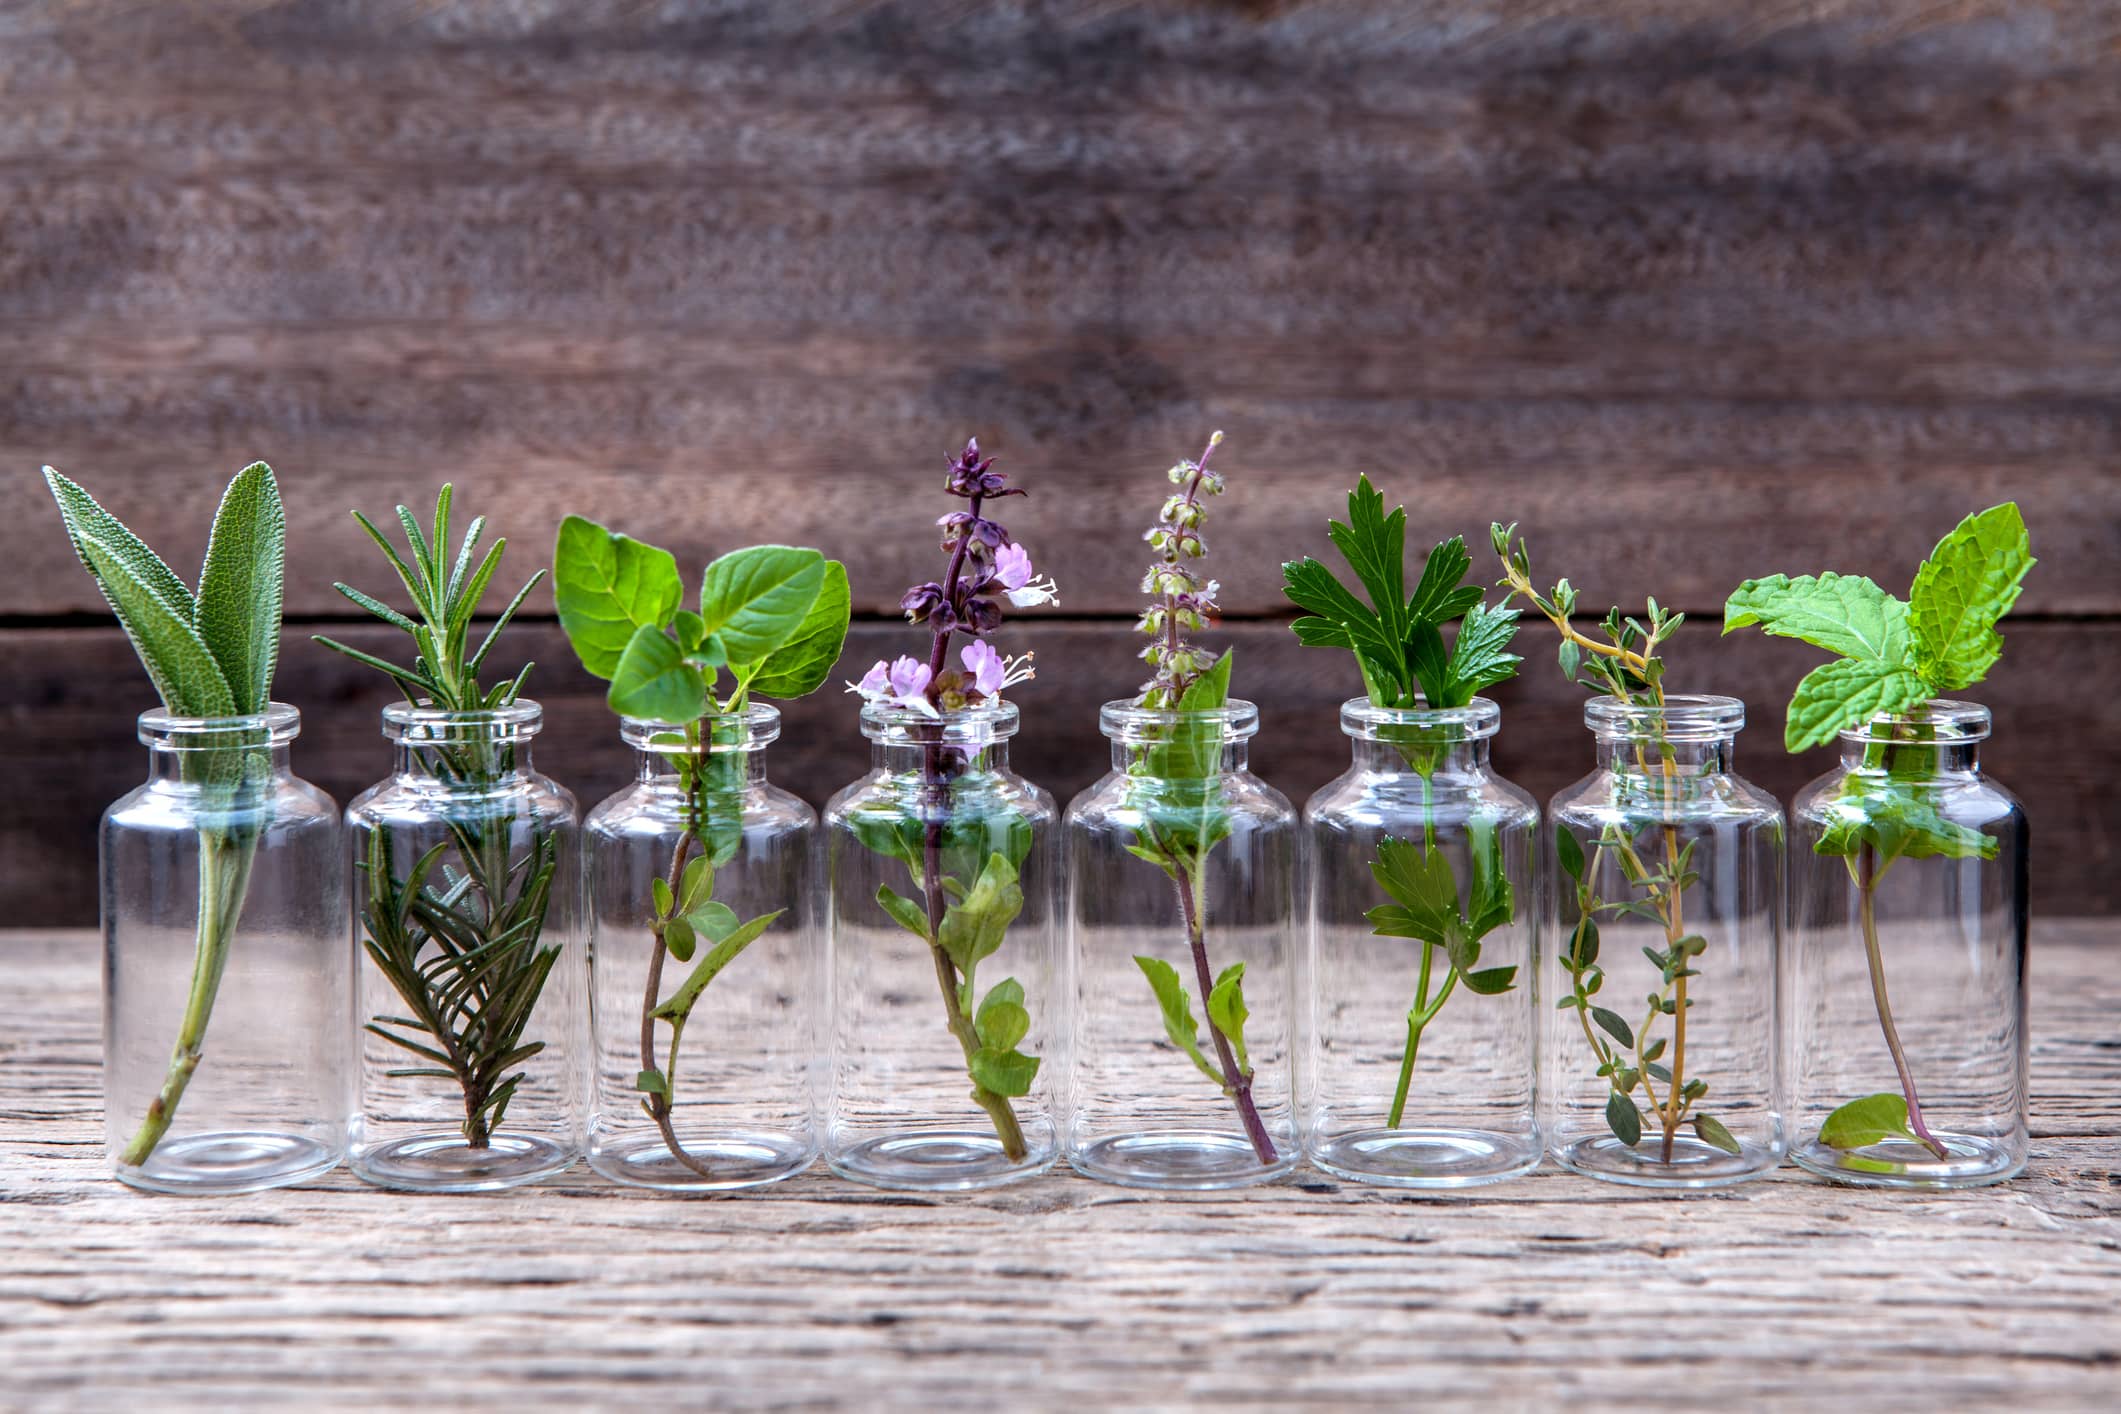 Essential oils are extracted from plants